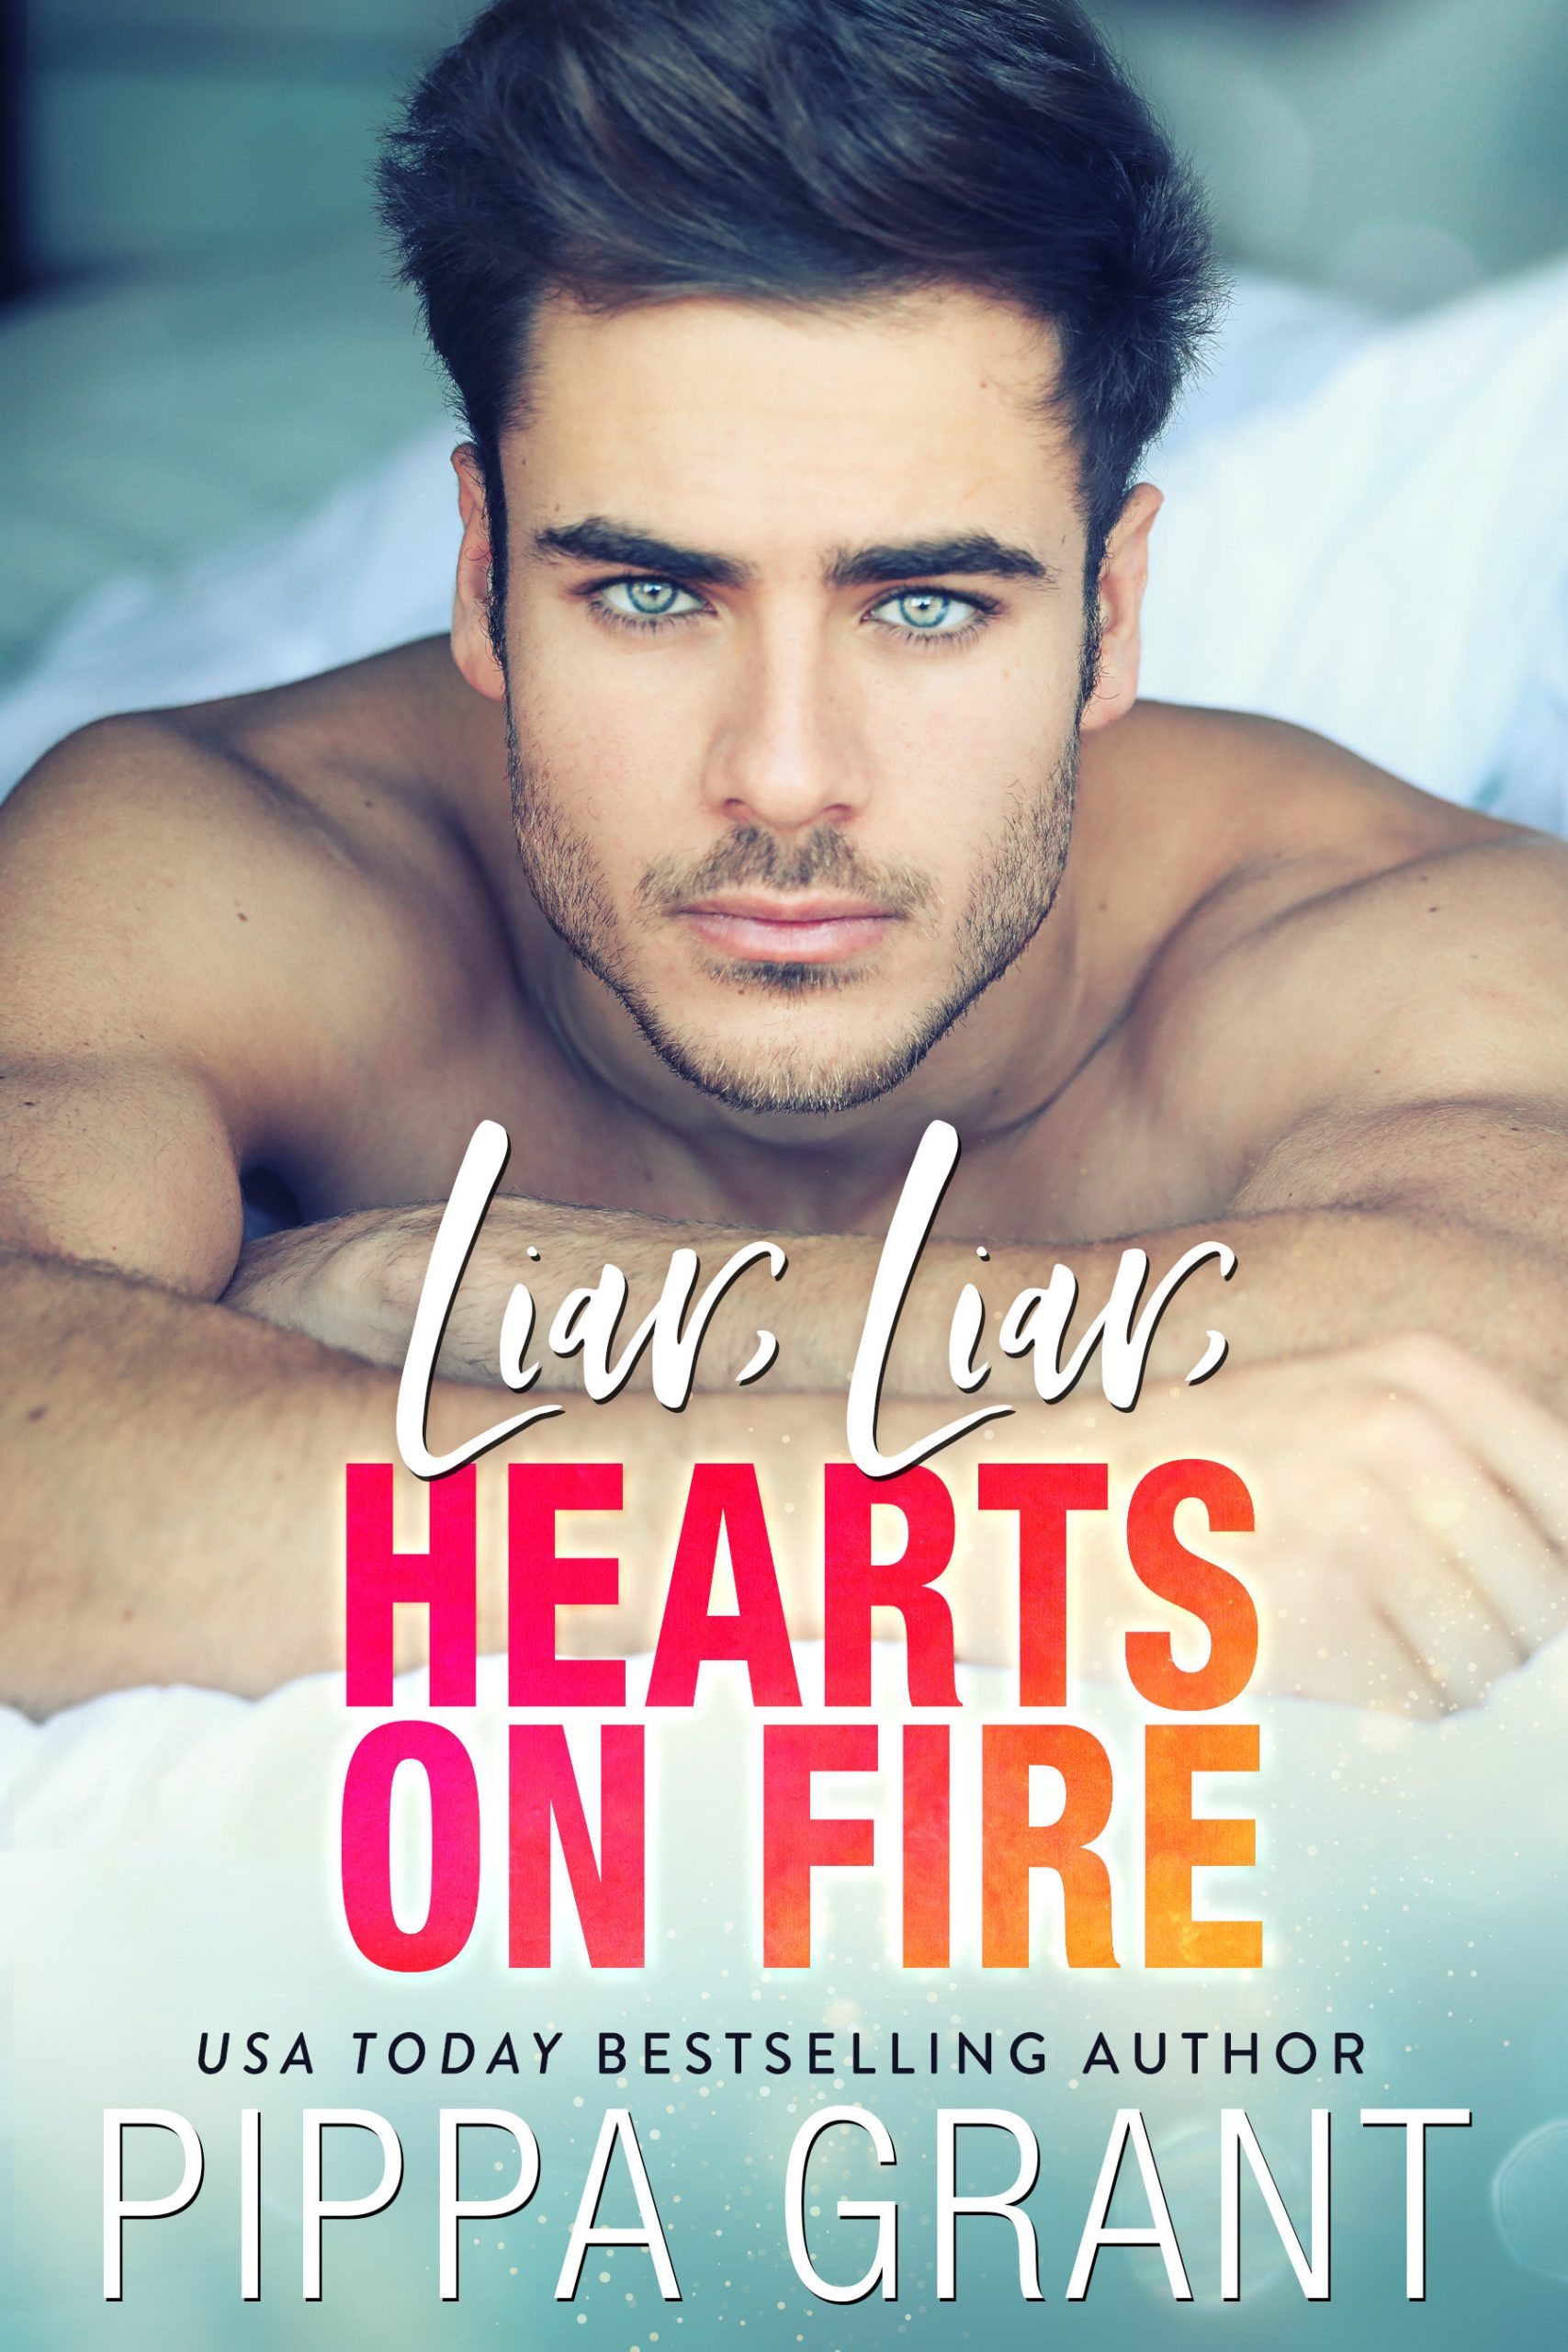 Review: Liar, Liar, Hearts on Fire by Pippa Grant